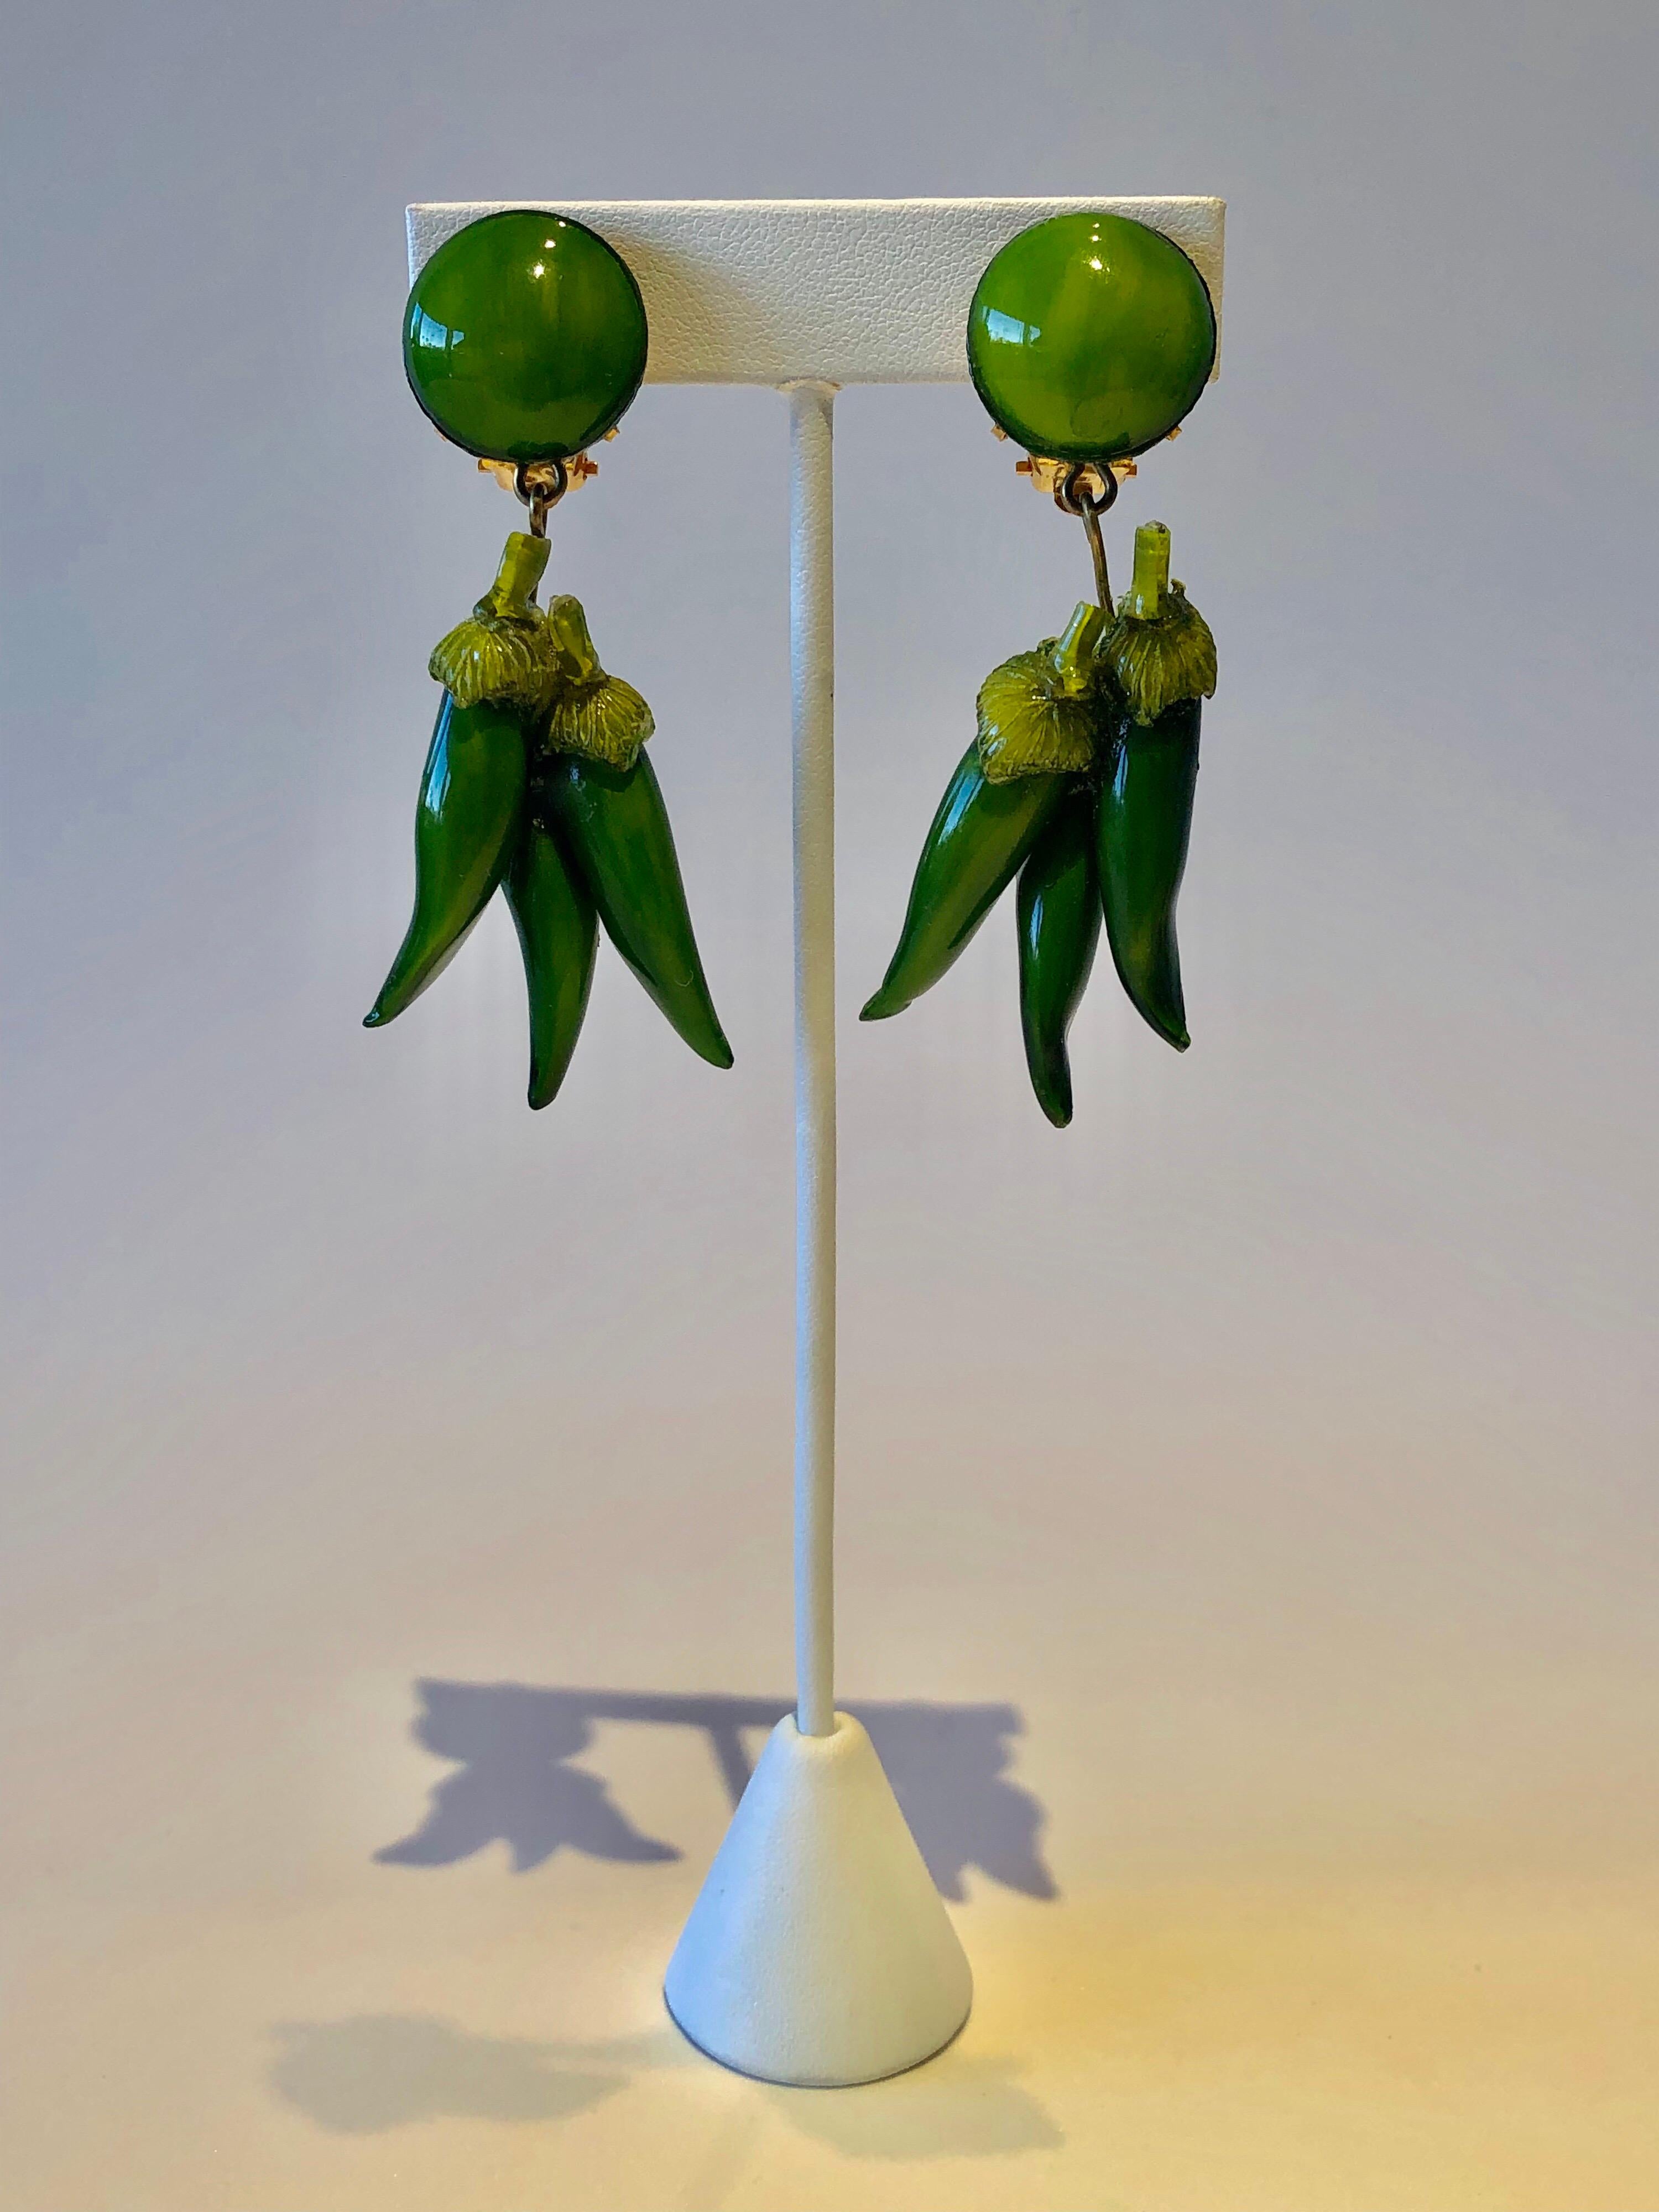 Bold green chili pepper clip-on statement earrings handcrafted in Paris France by Cilea - the earrings feature a cluster of three enameline (enamel and resin) chili peppers. Lightweight and comfortable, signed Cilea Paris on the back.